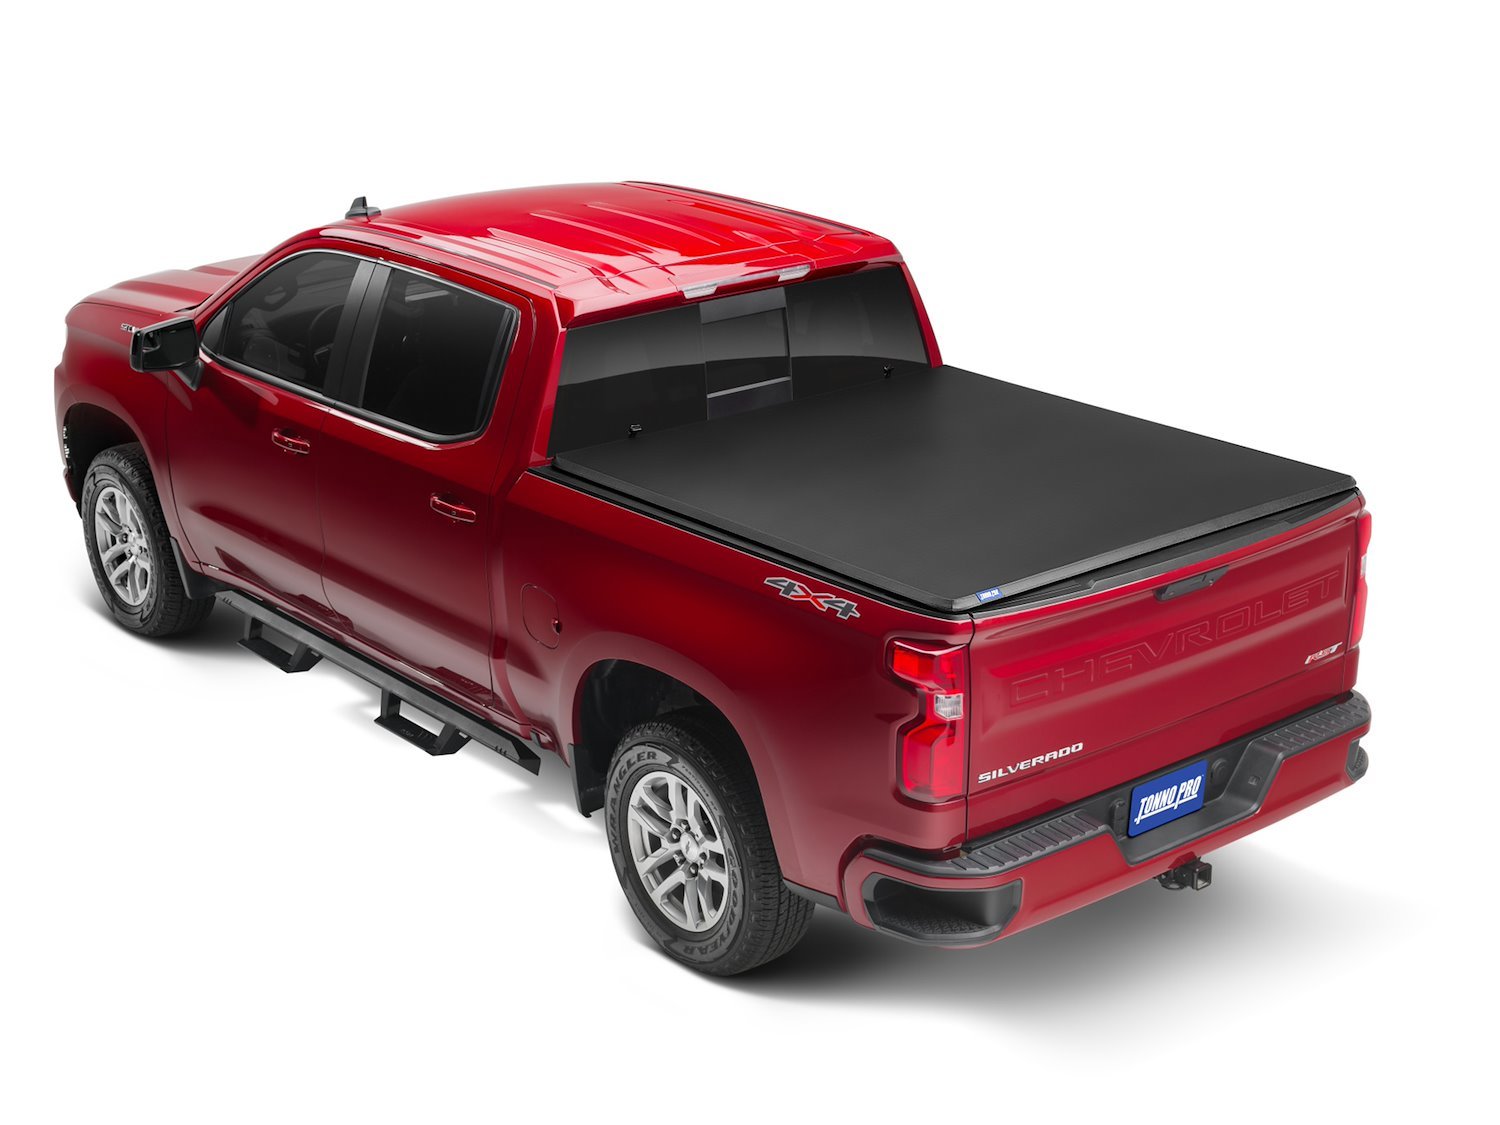 Soft Vinyl Tri-Fold Tonneau Cover Fits Select GM Silverado/Sierra 2500 HD, 3500 HD Trucks [8 ft. 2 in. Bed without Side Boxes]